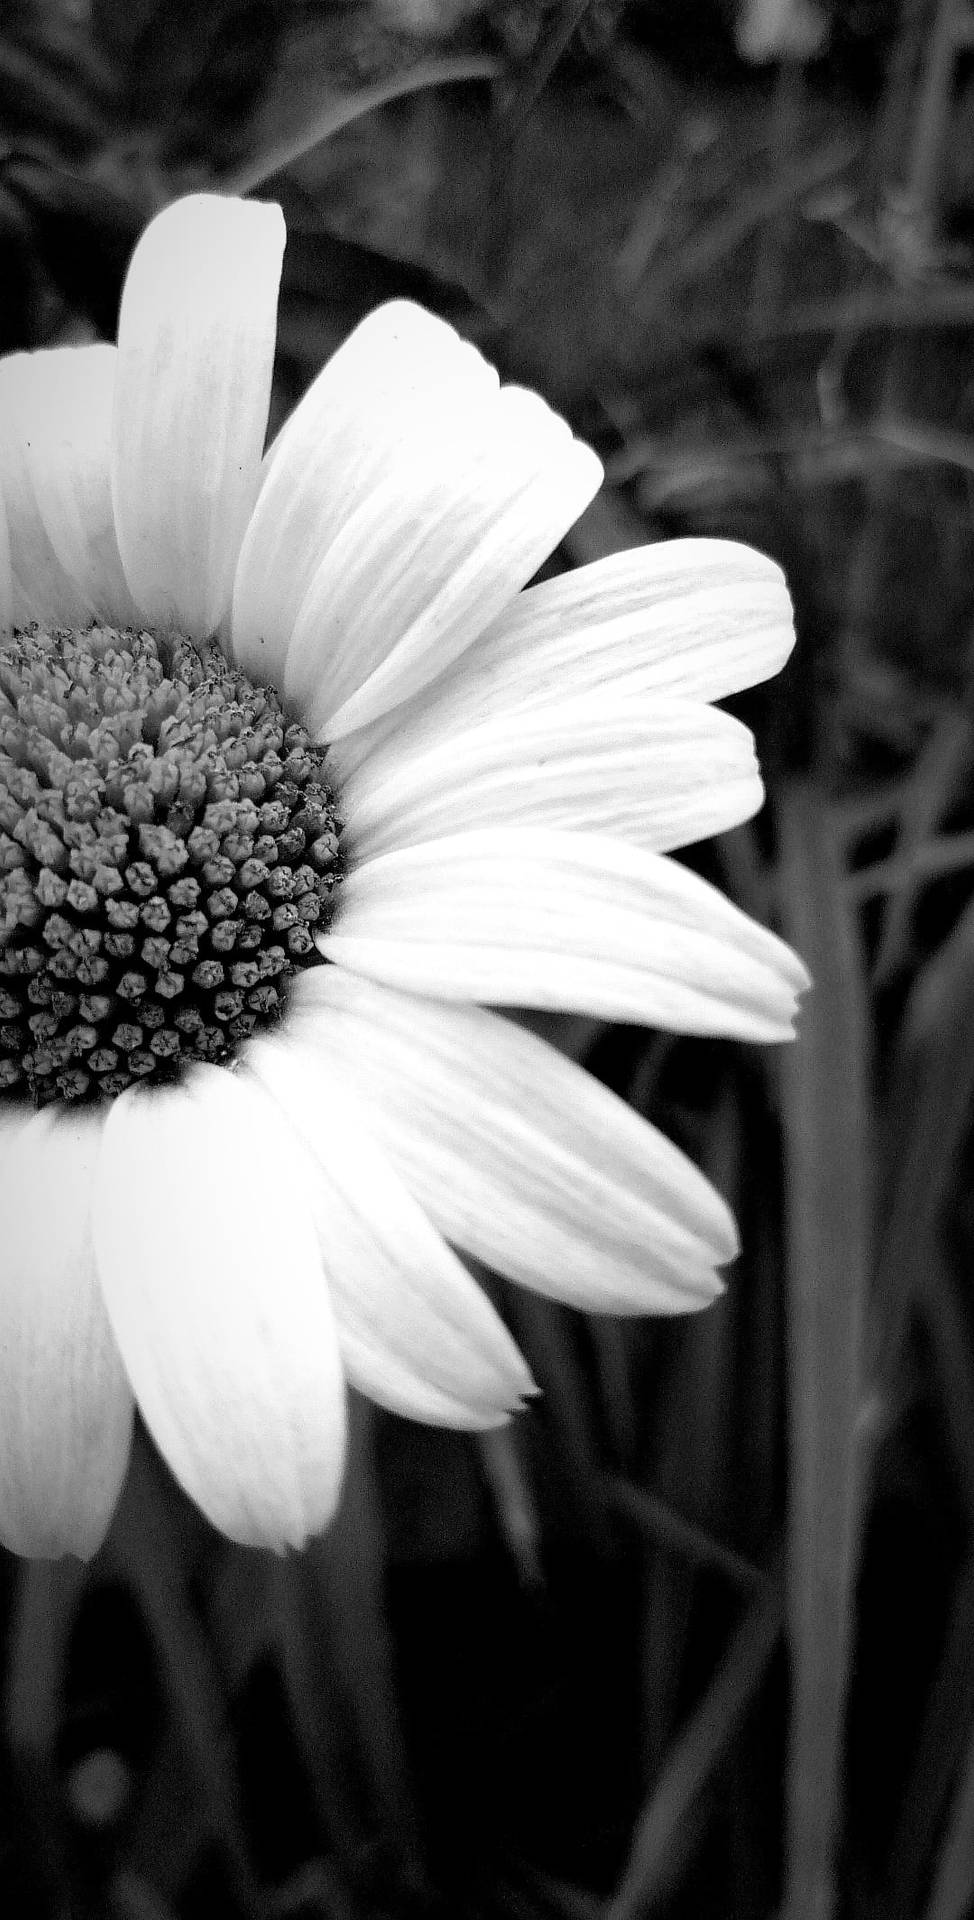 Black And White Flower And Grass Wallpaper